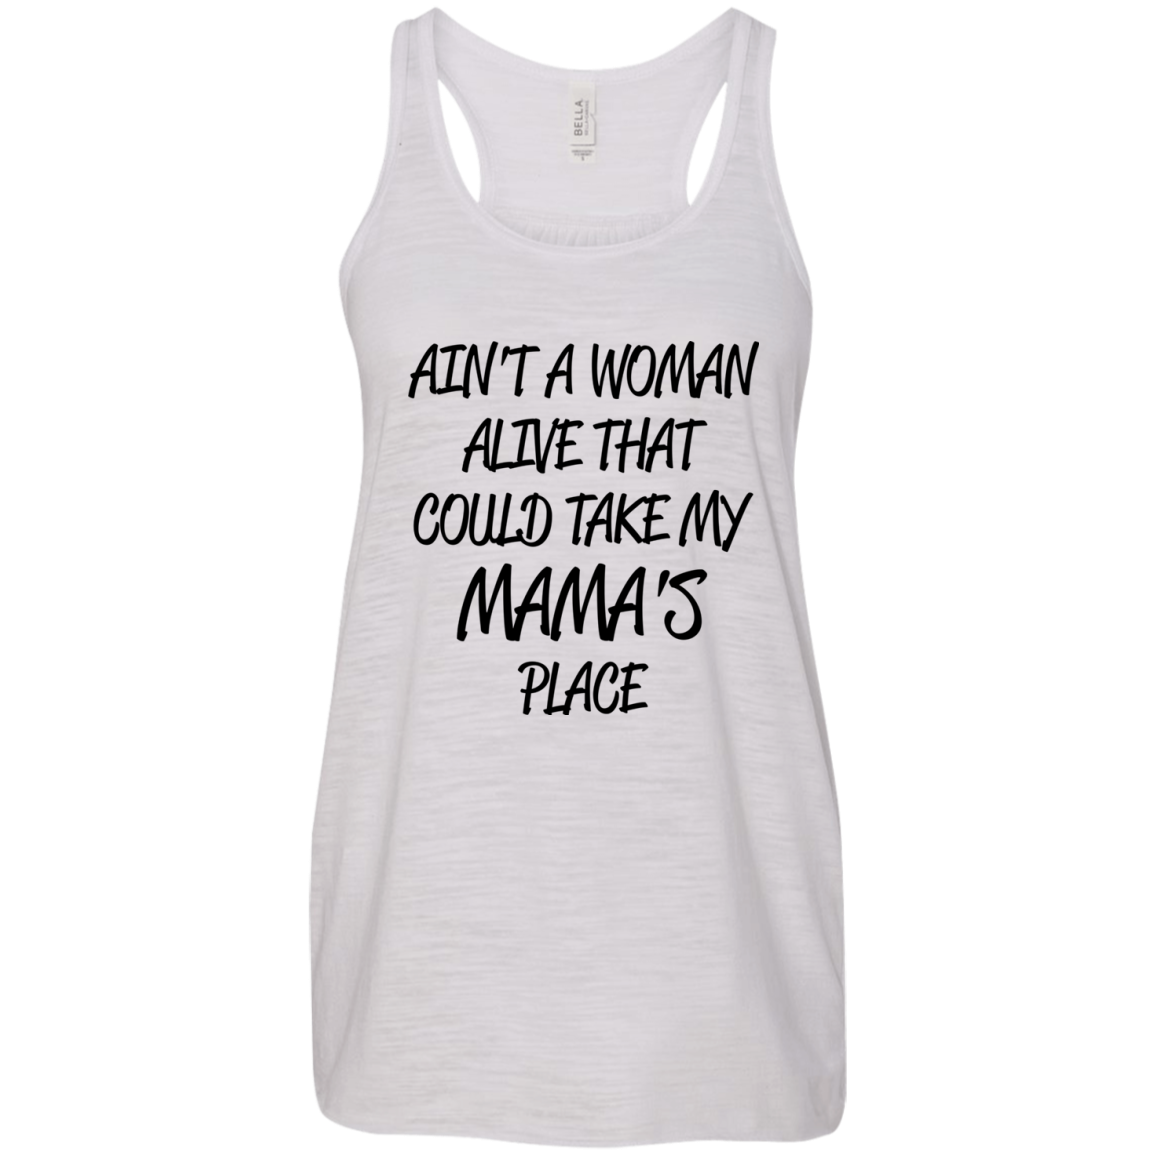 Download Ain't A Woman Alive That Could Take My Mama's Place Shirt